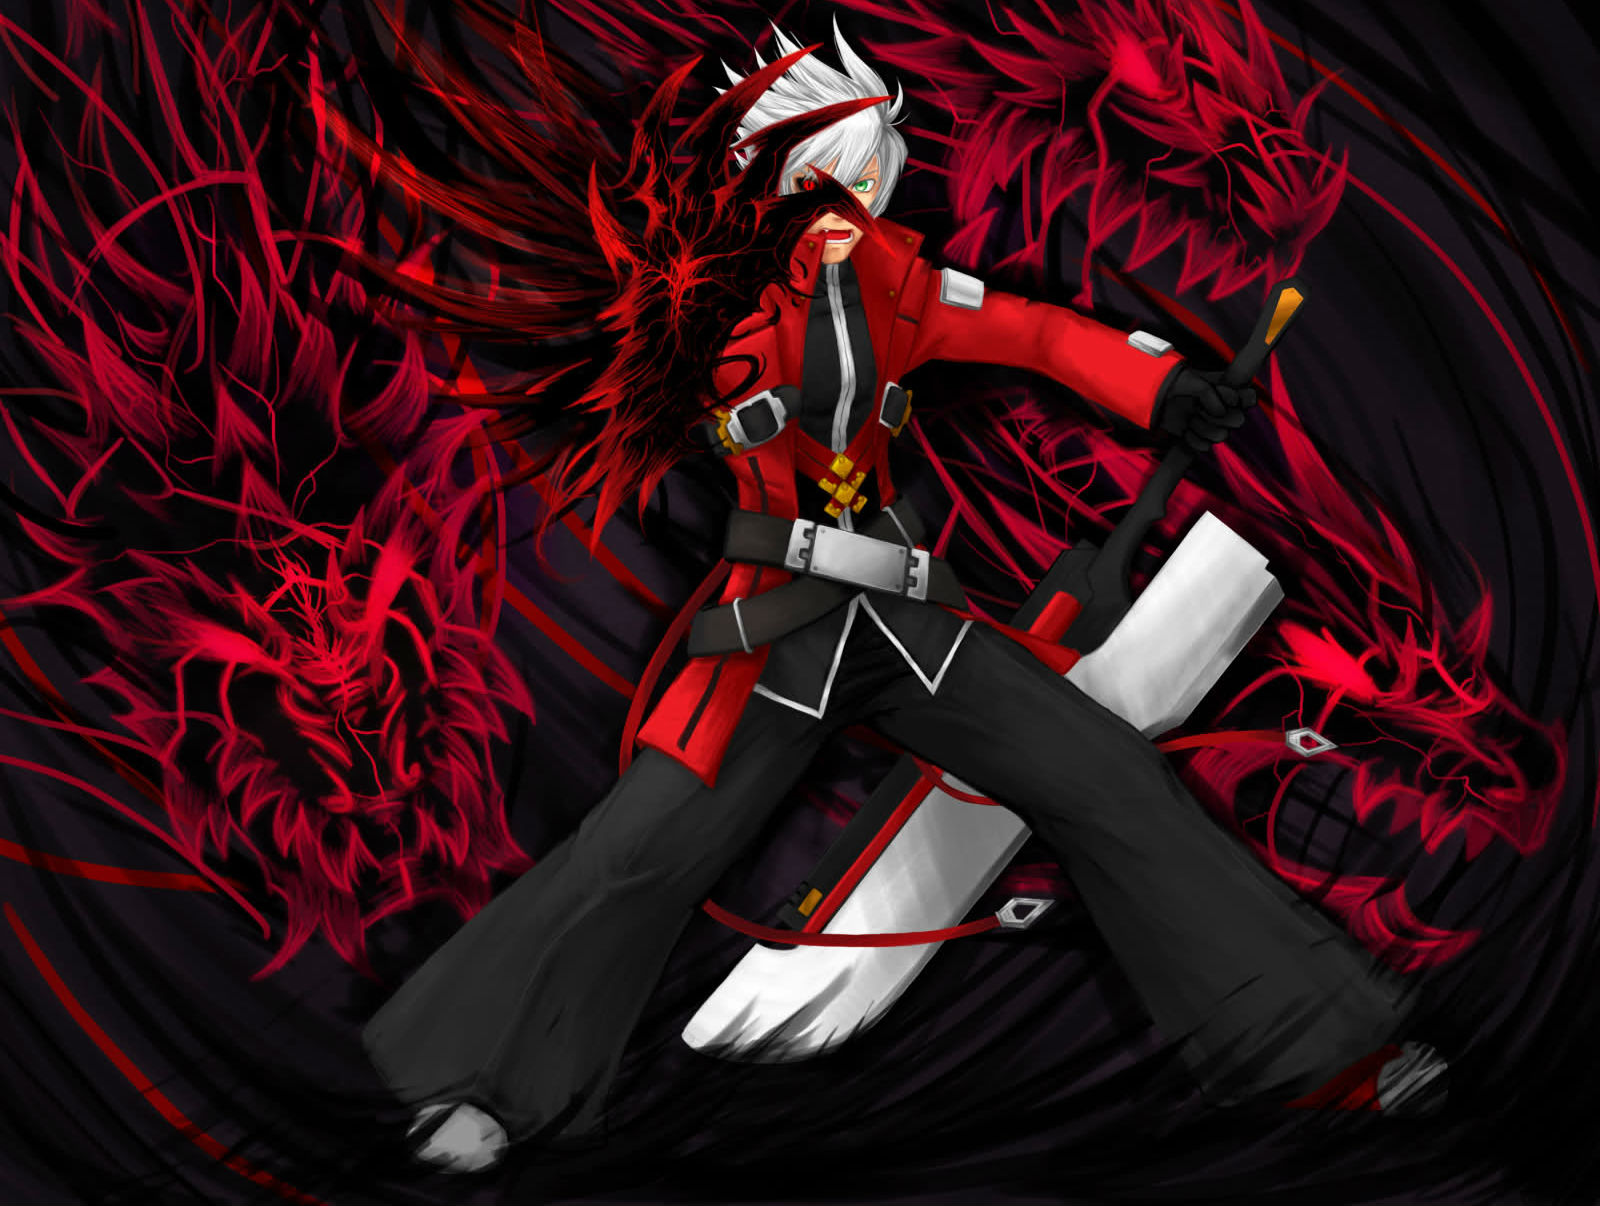 Wallpapers Ragna Alpha Coders Abyss Anime Blazblue 1600x1206 292967